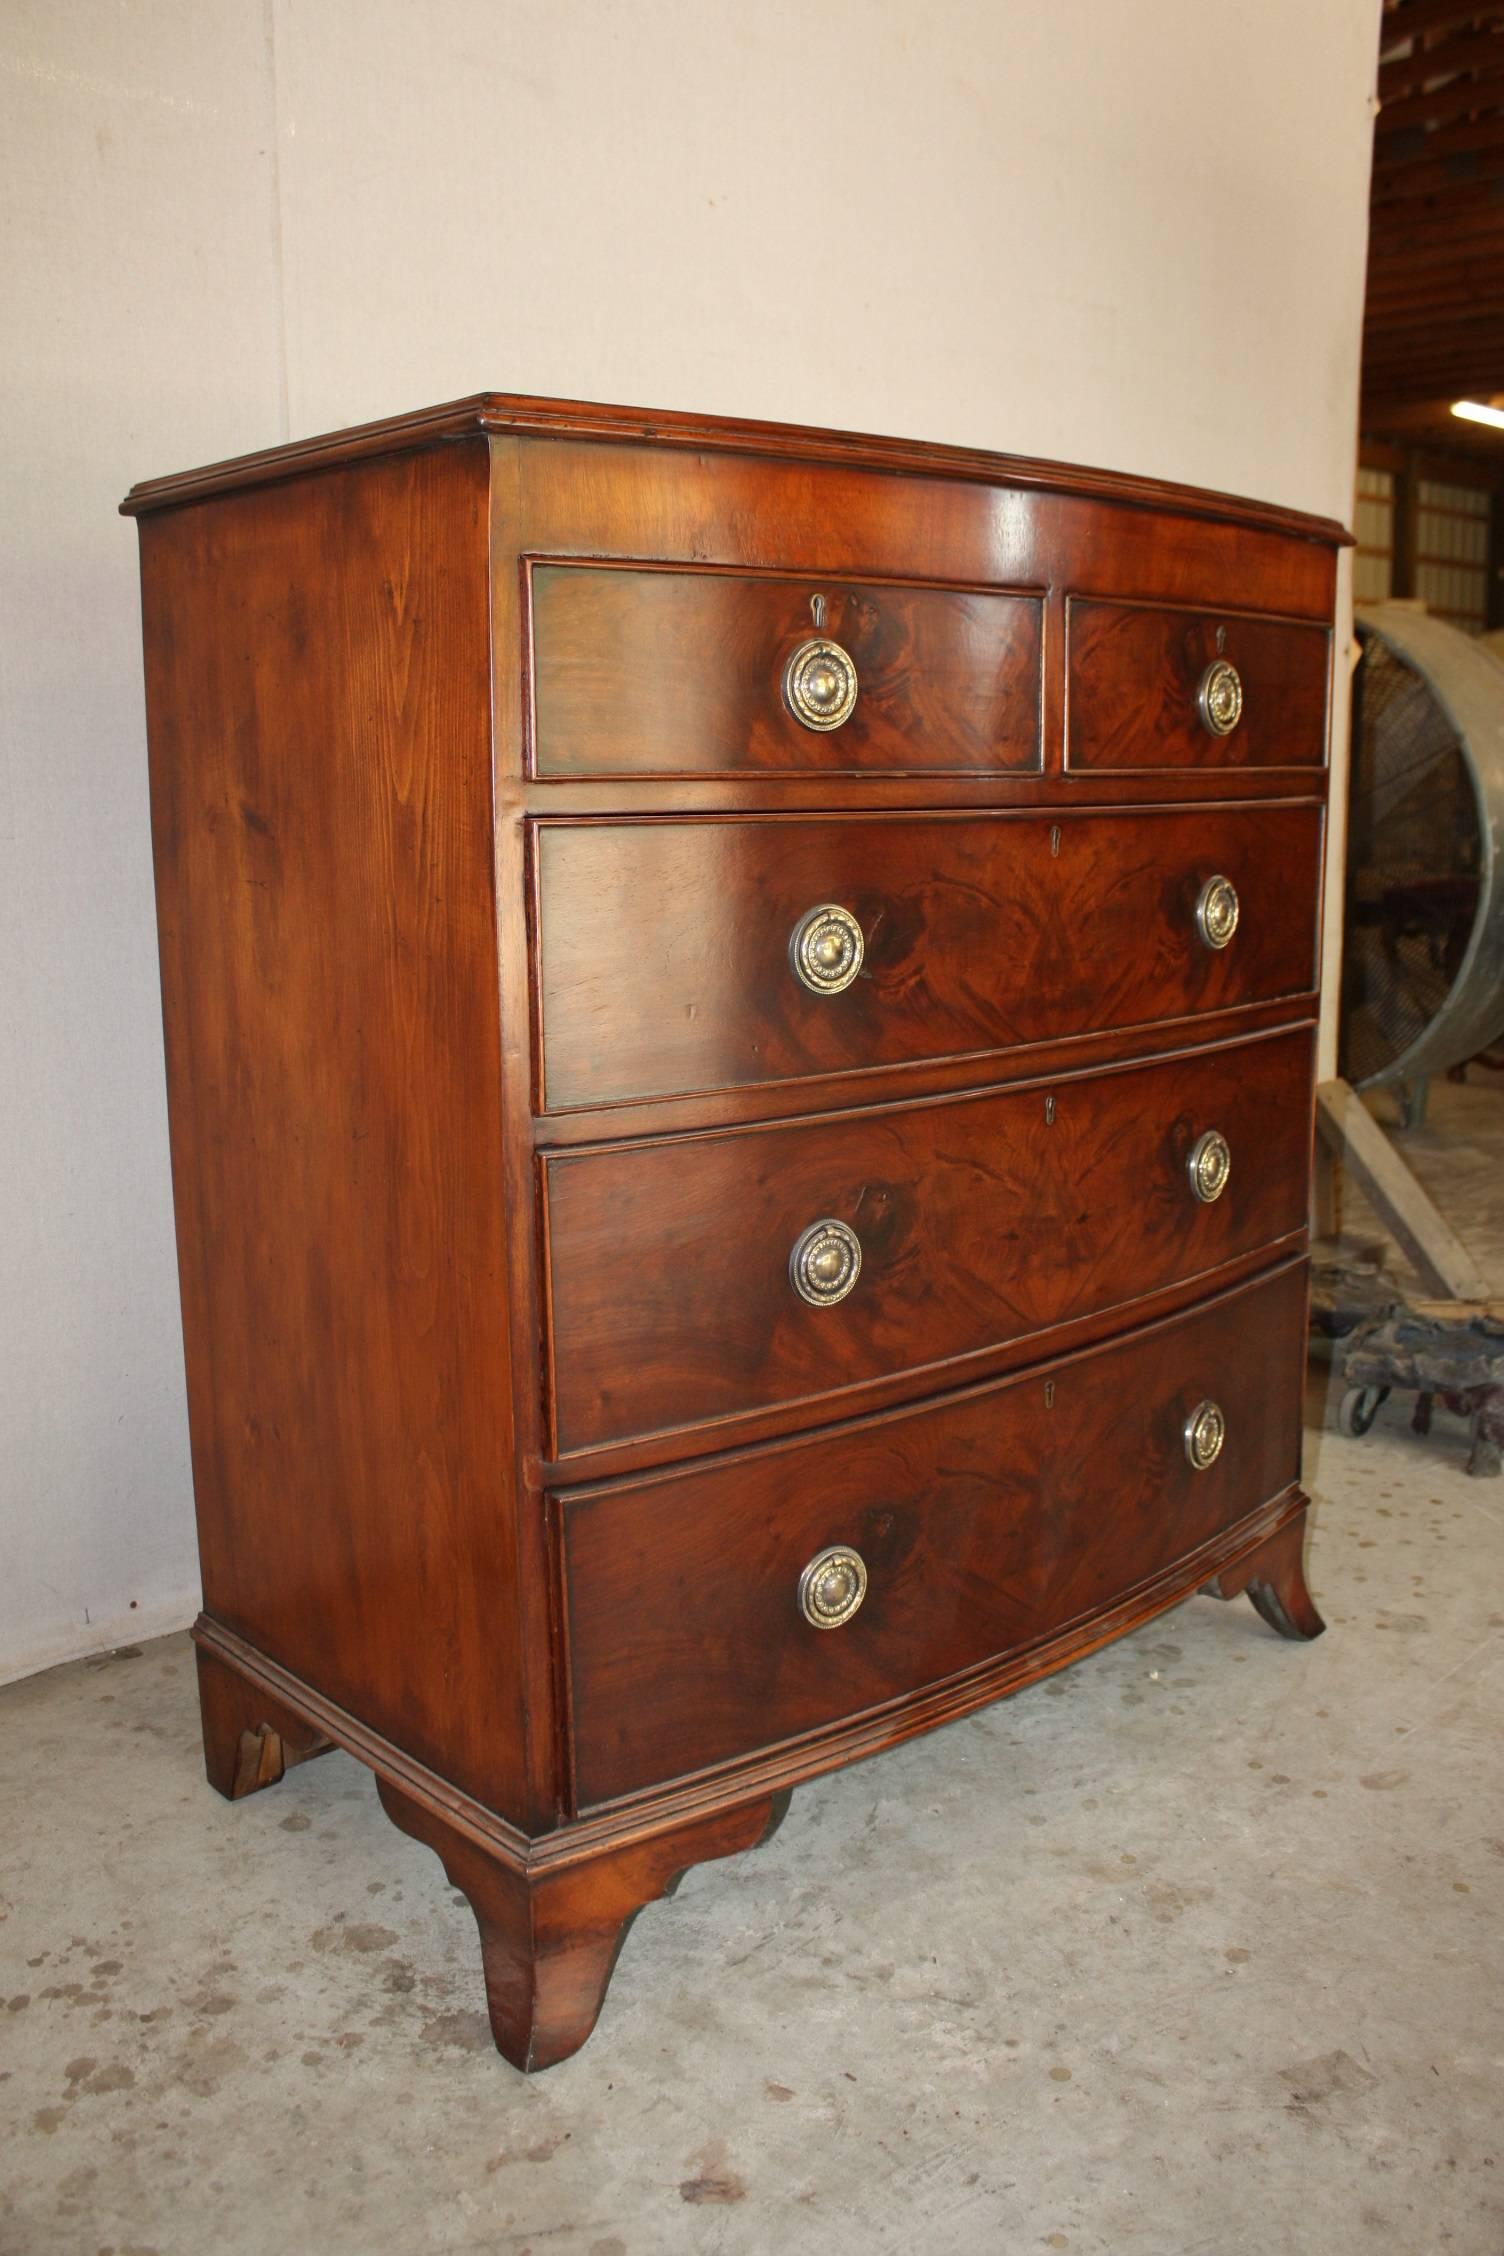 A very large 19th century antique mahogany bow fronted chest of drawers, with two smaller drawers over three large graduated drawers sitting on four turned legs.